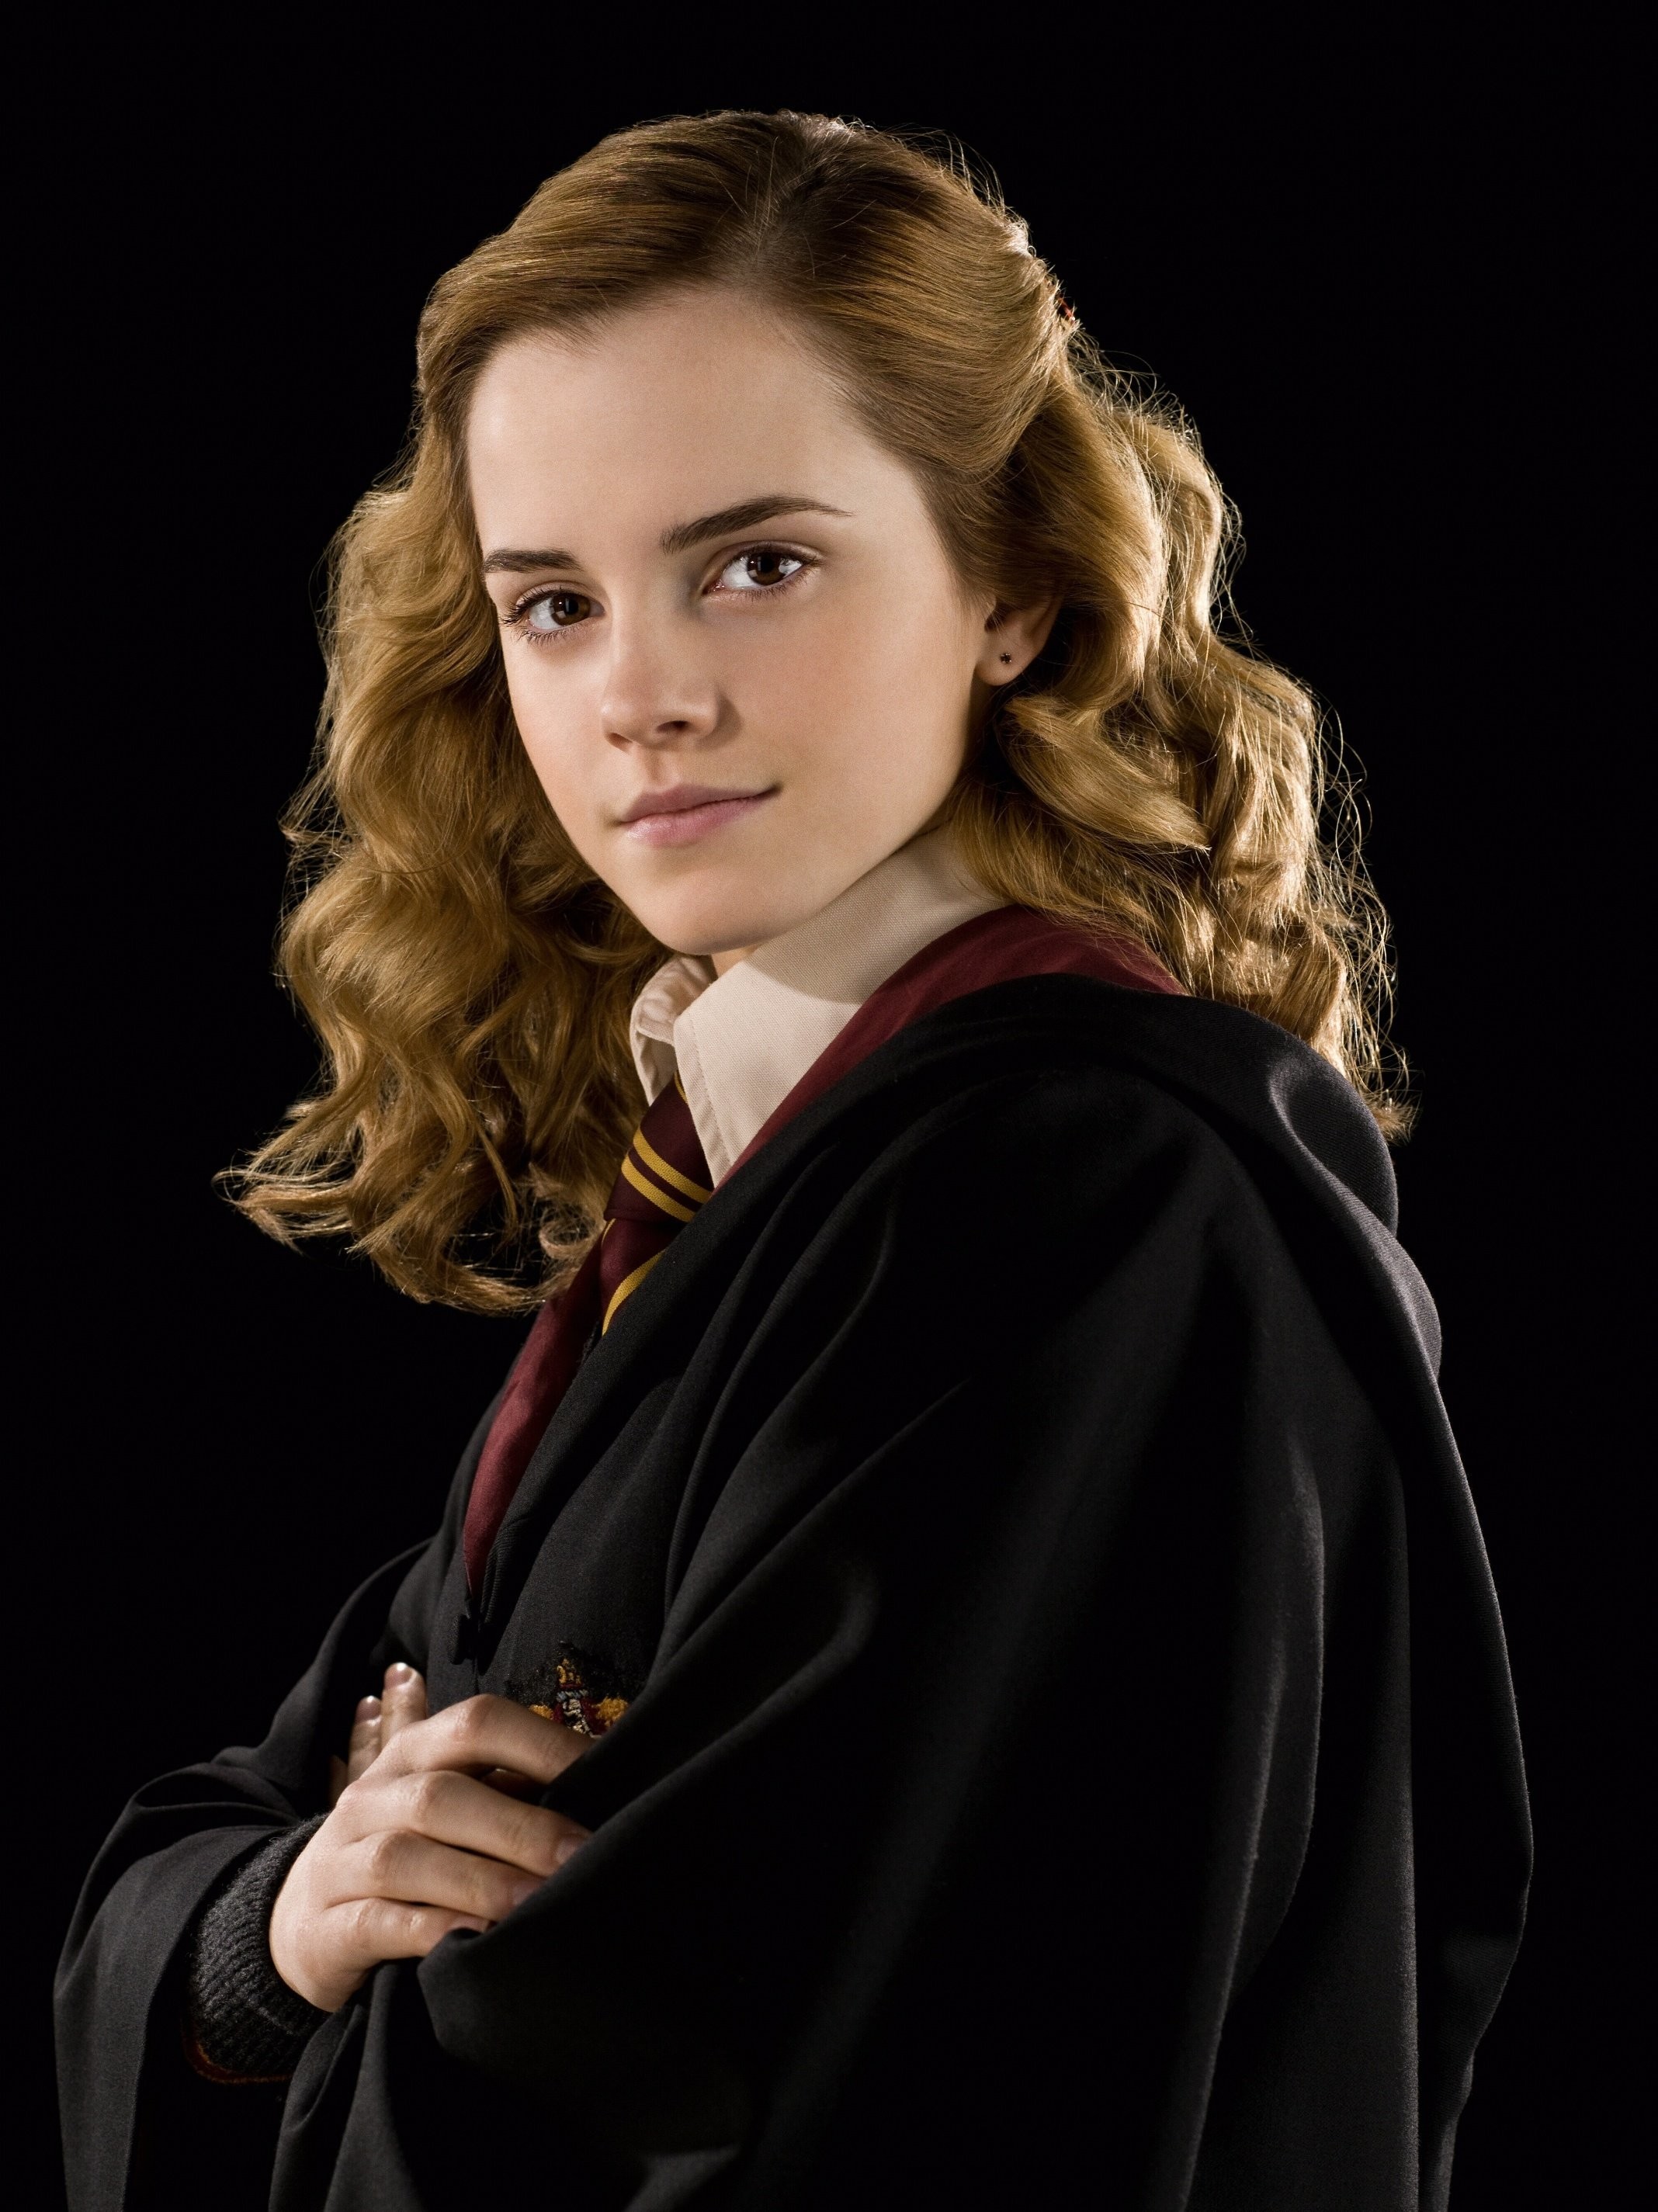 25hermione Granger Quot Luna Has Told Me All About You Young Lady You Are I Gather Not Unintelligent But Painfully Limited Narrow Close Minded Quot 2136x2850